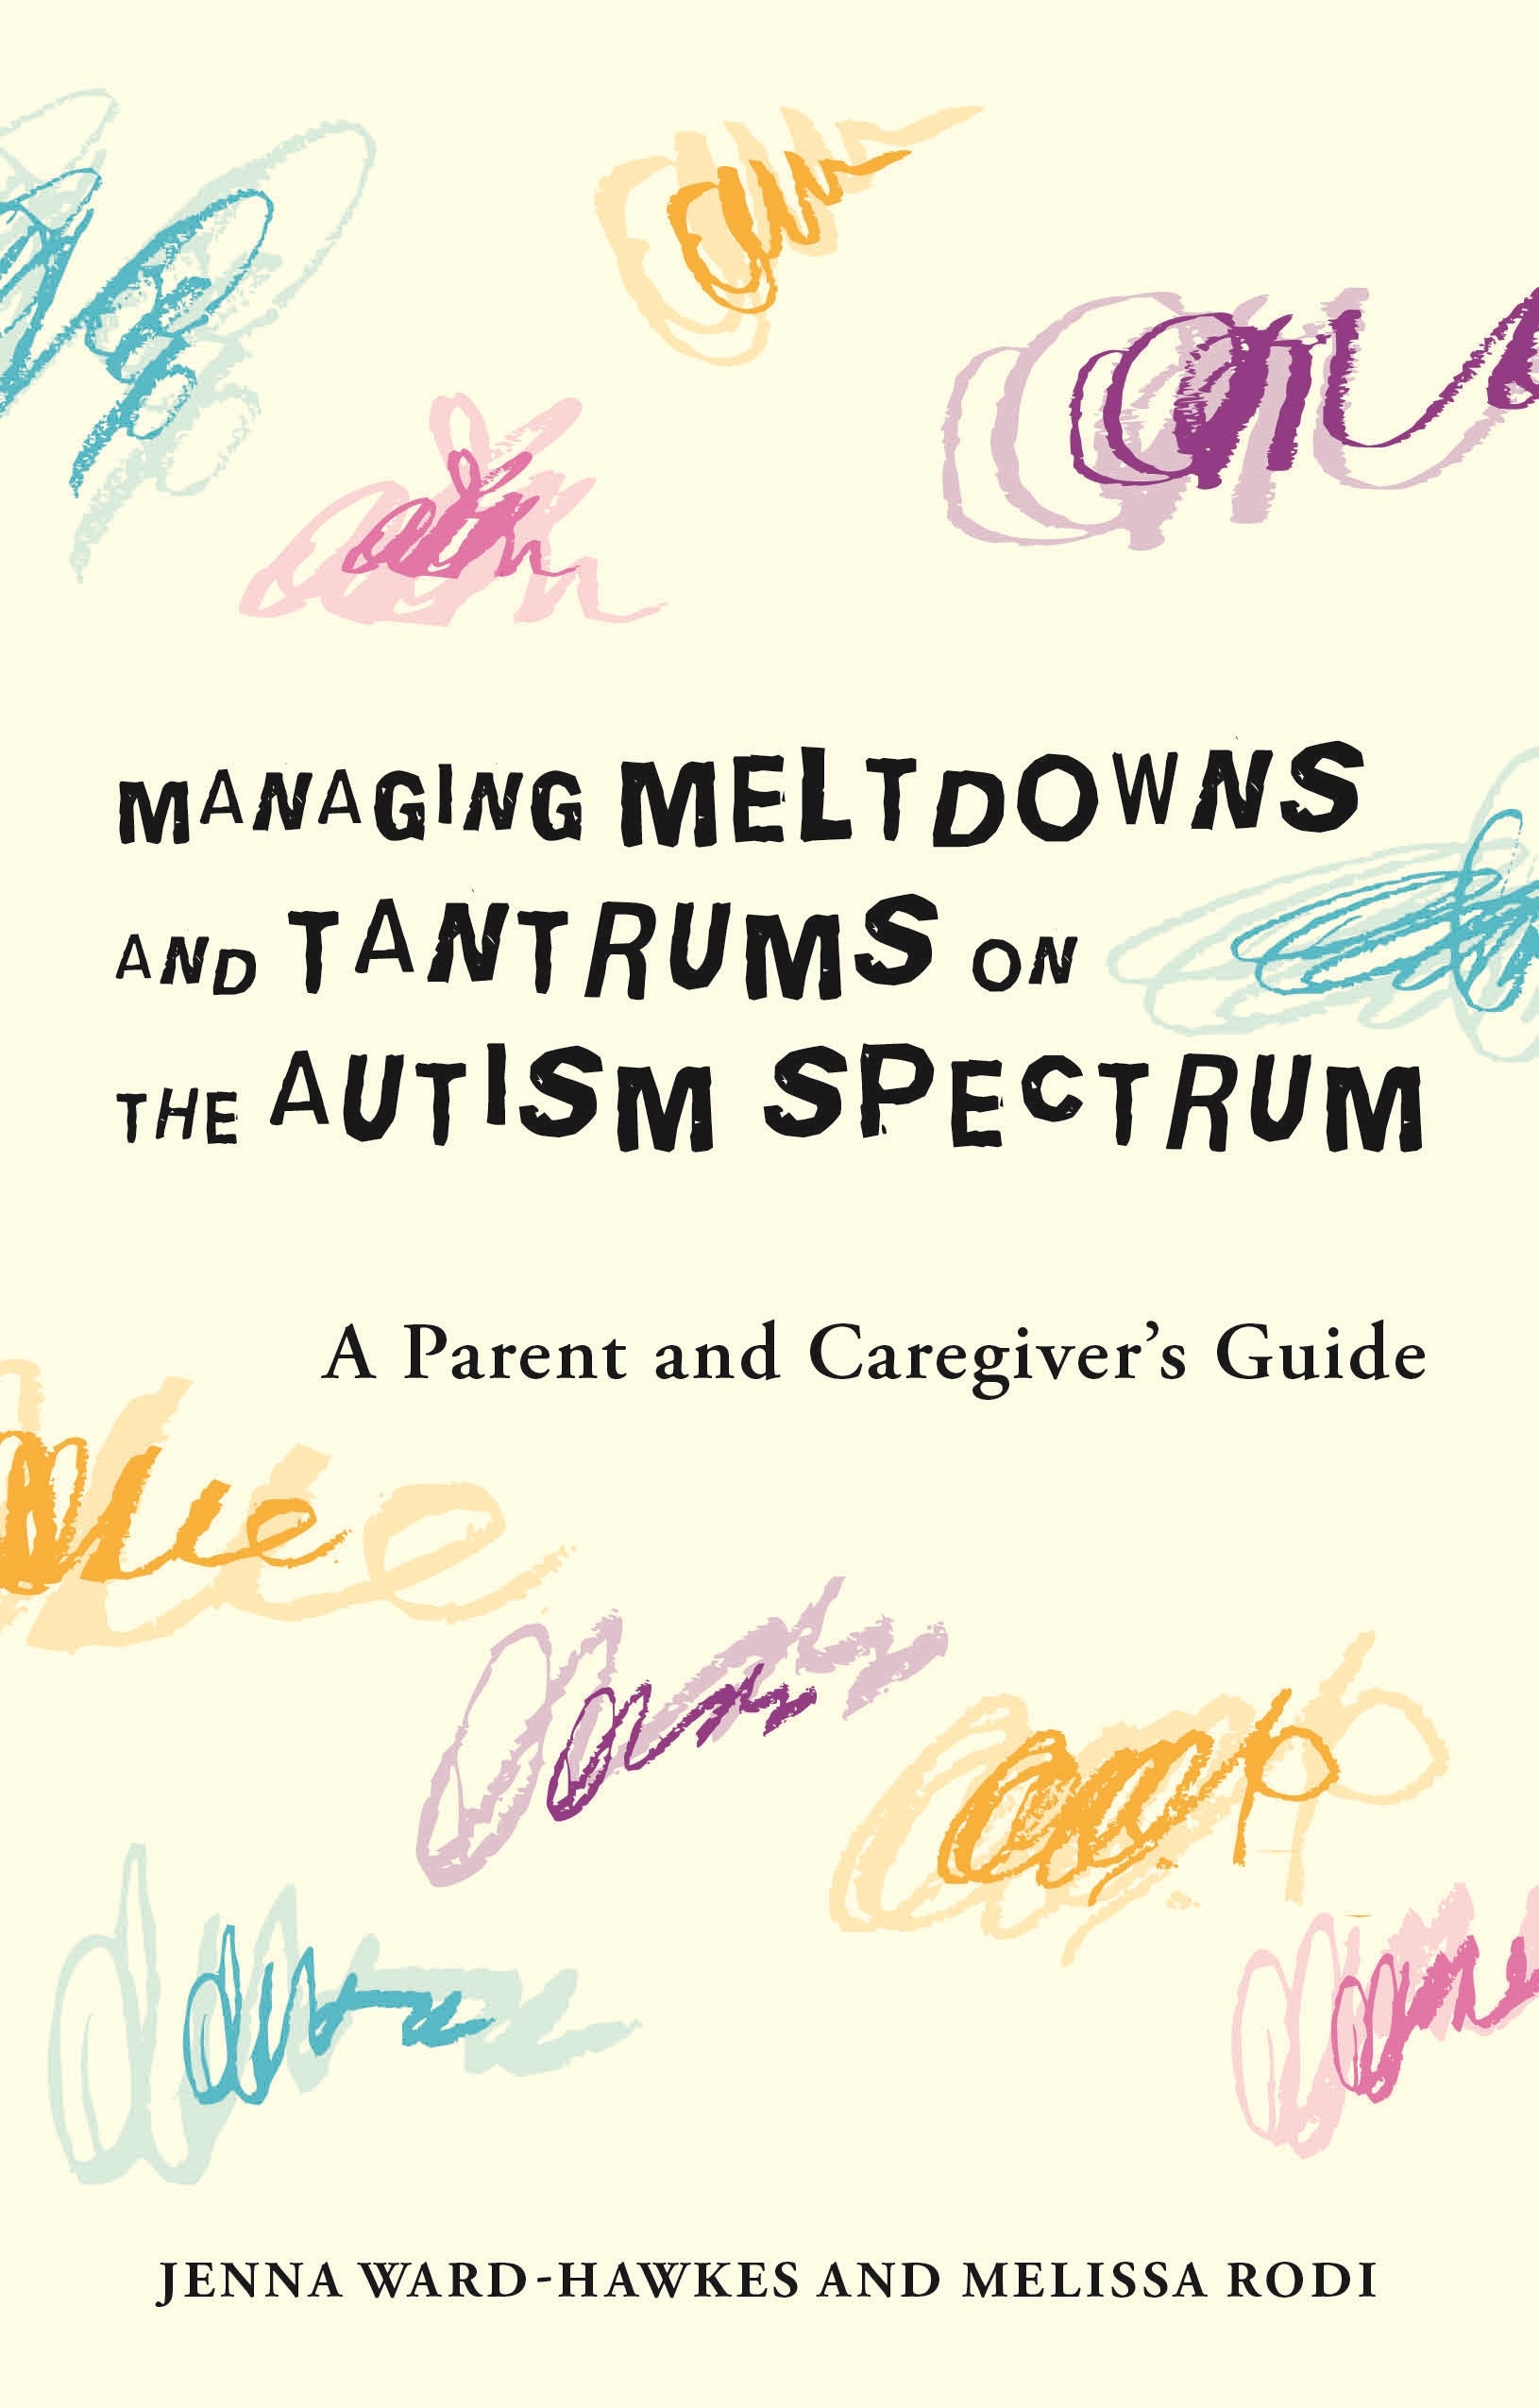 Managing Meltdowns and Tantrums on the Autism Spectrum by Melissa Rodi, Jenna Ward-Hawkes, Paul Banwell